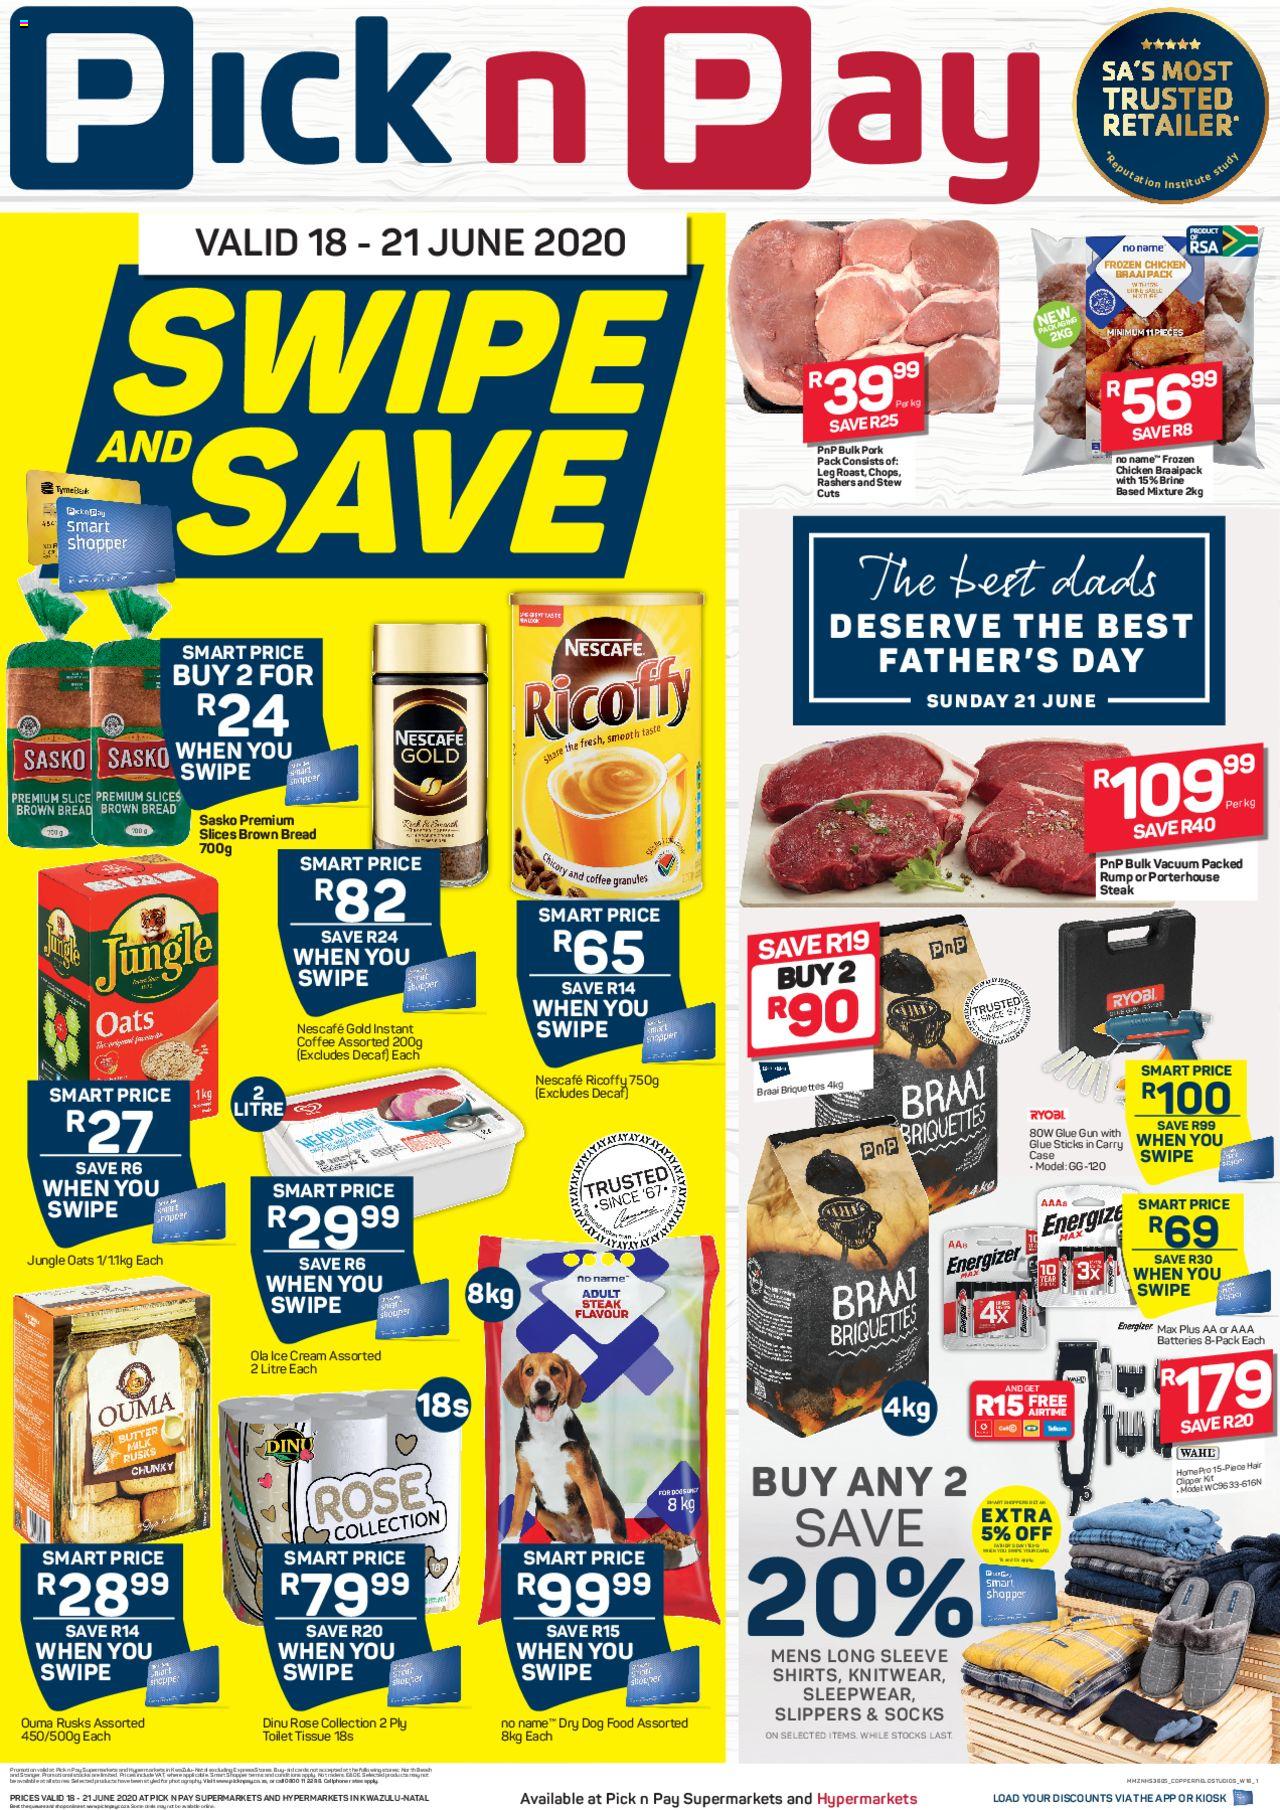 Pick n Pay Specials Swipe and Save 18 June 2020